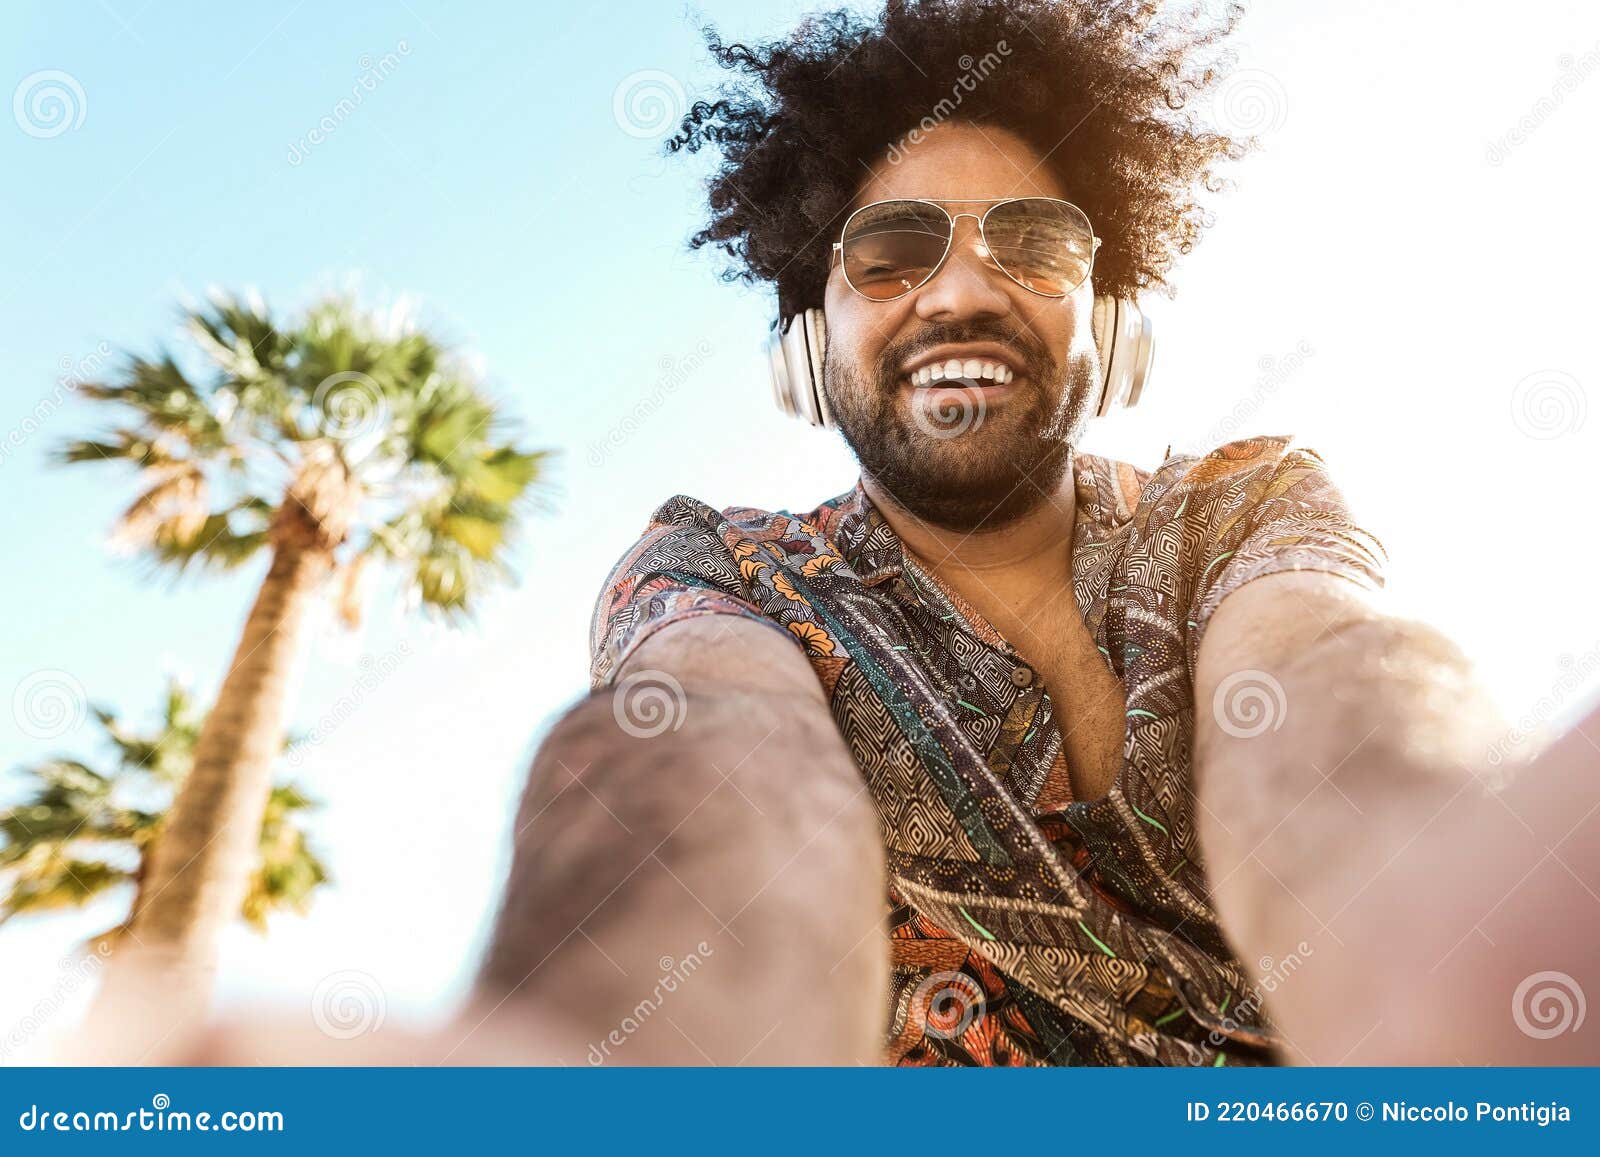 african american man listening music with headphones outdoor with palm trees in background - summer lifestyle, travel and party